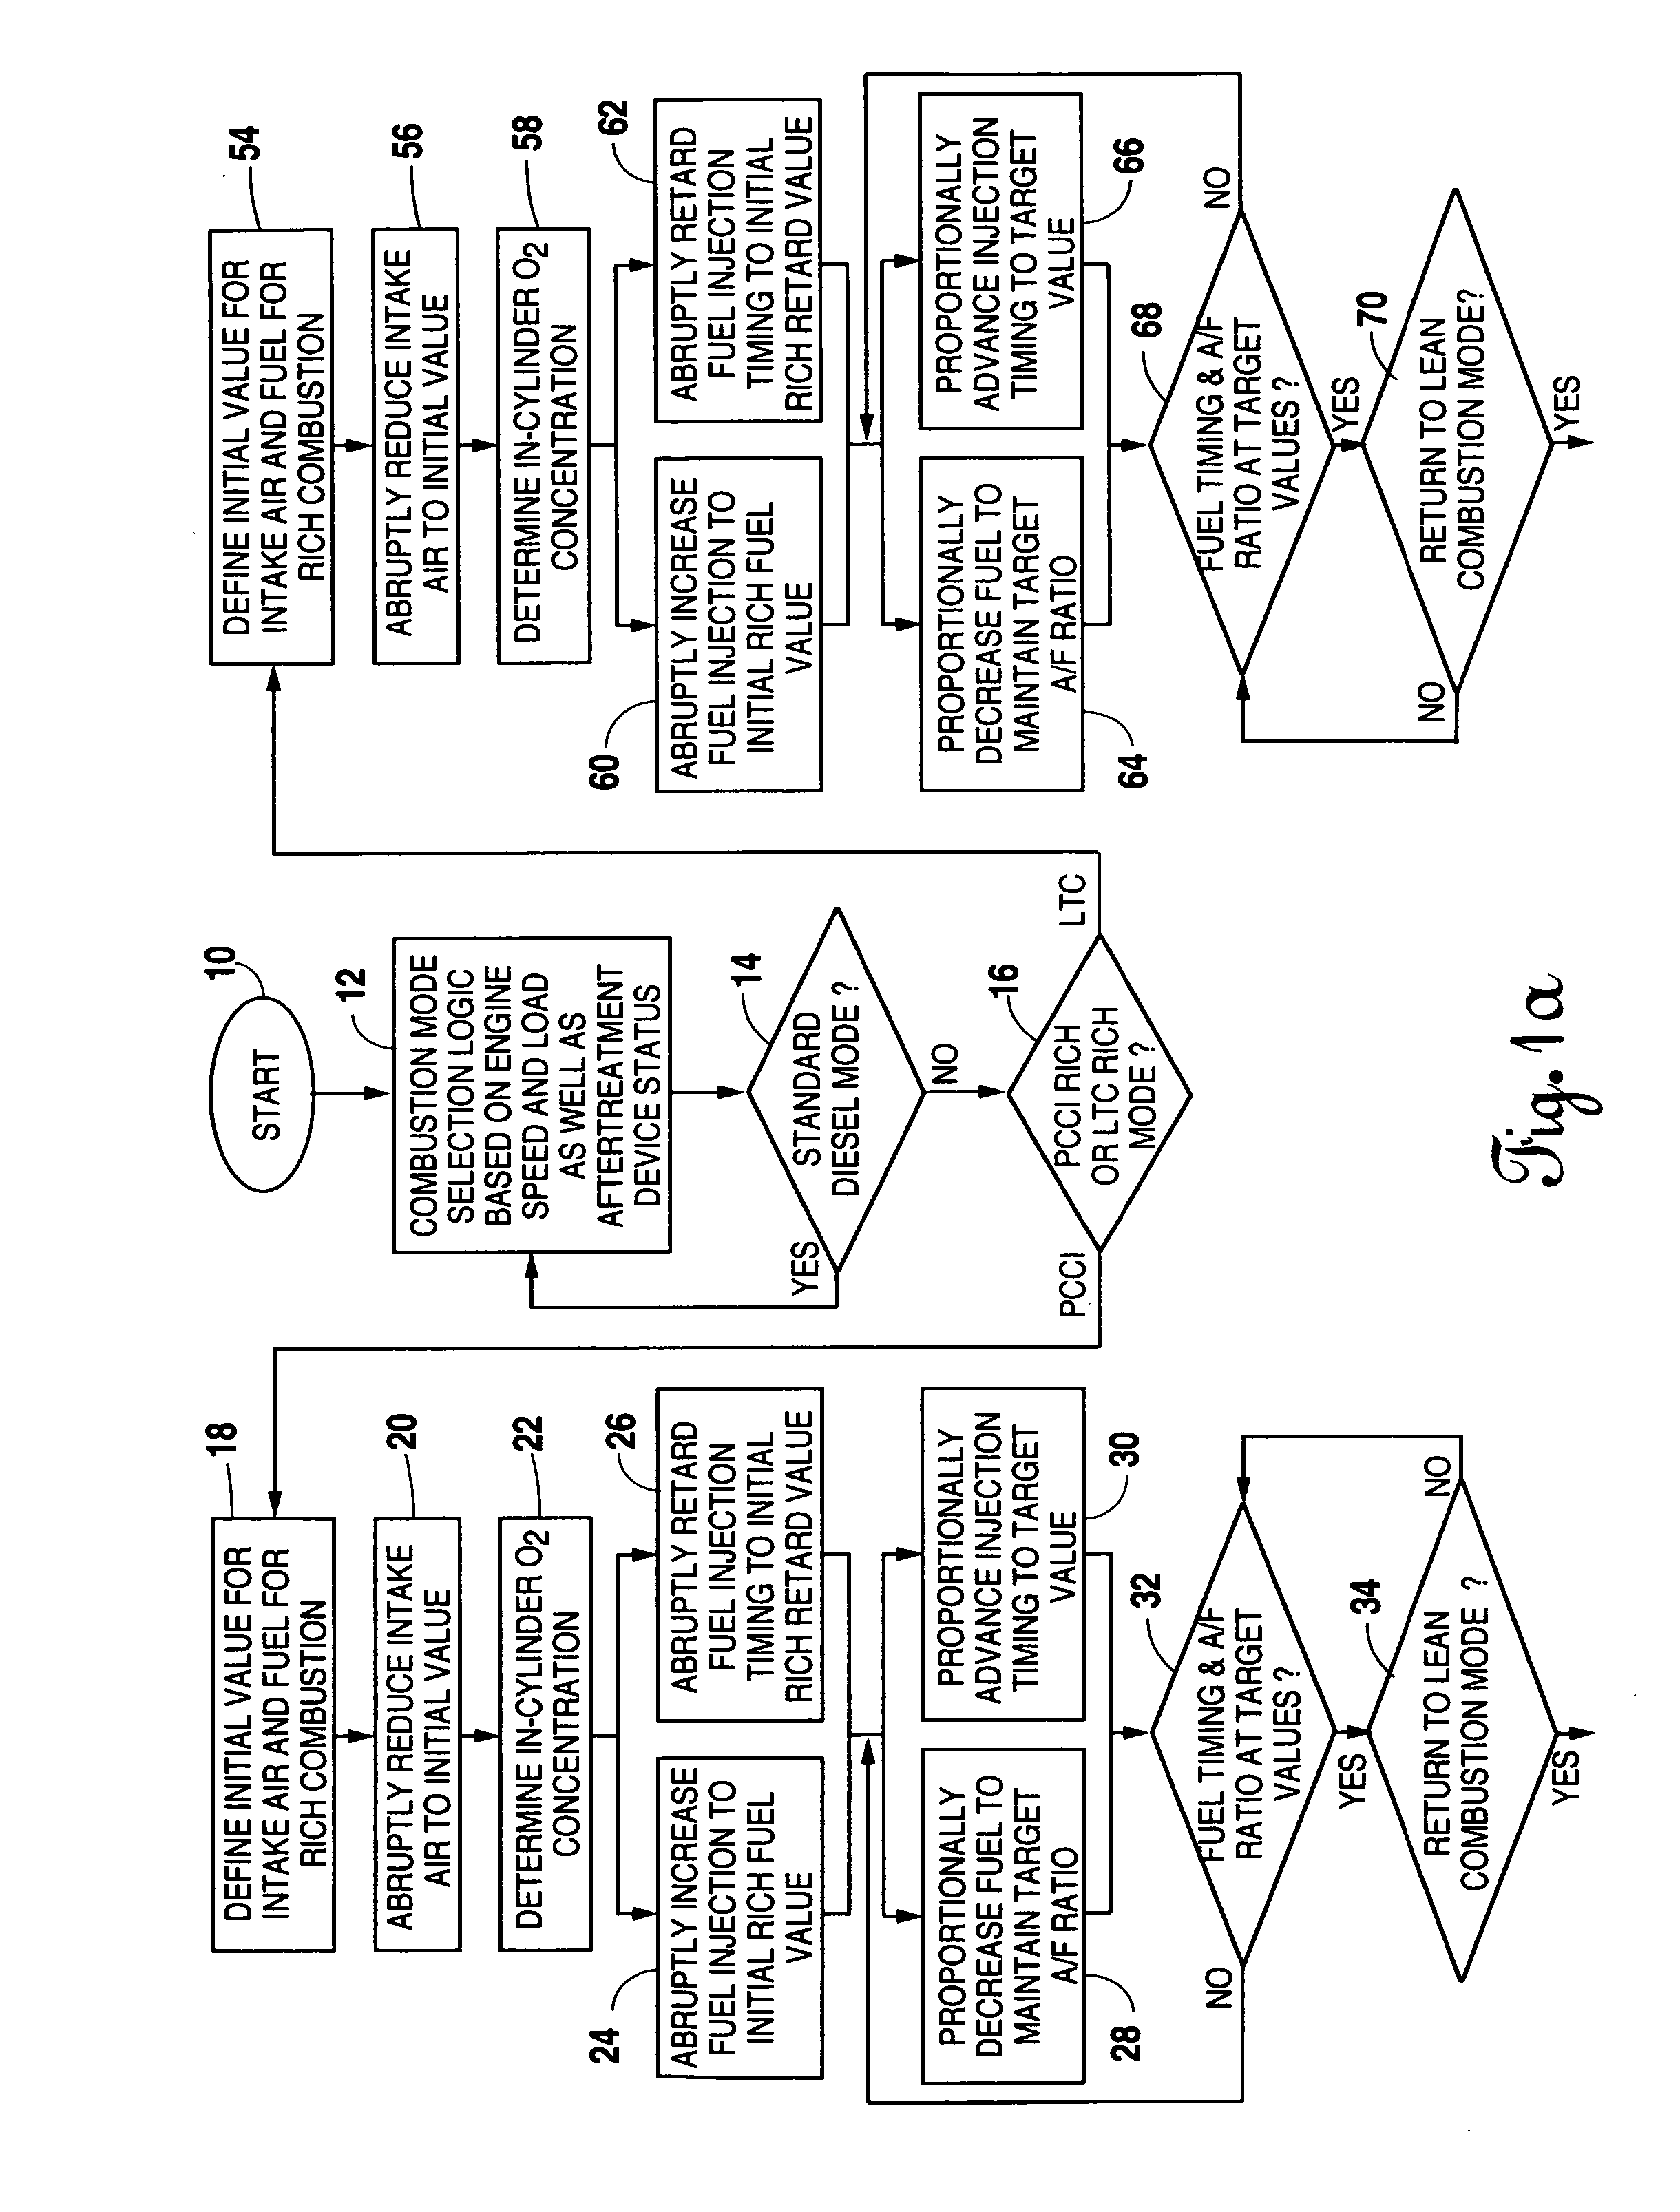 Method for rapid, stable torque transition between lean rich combustion modes